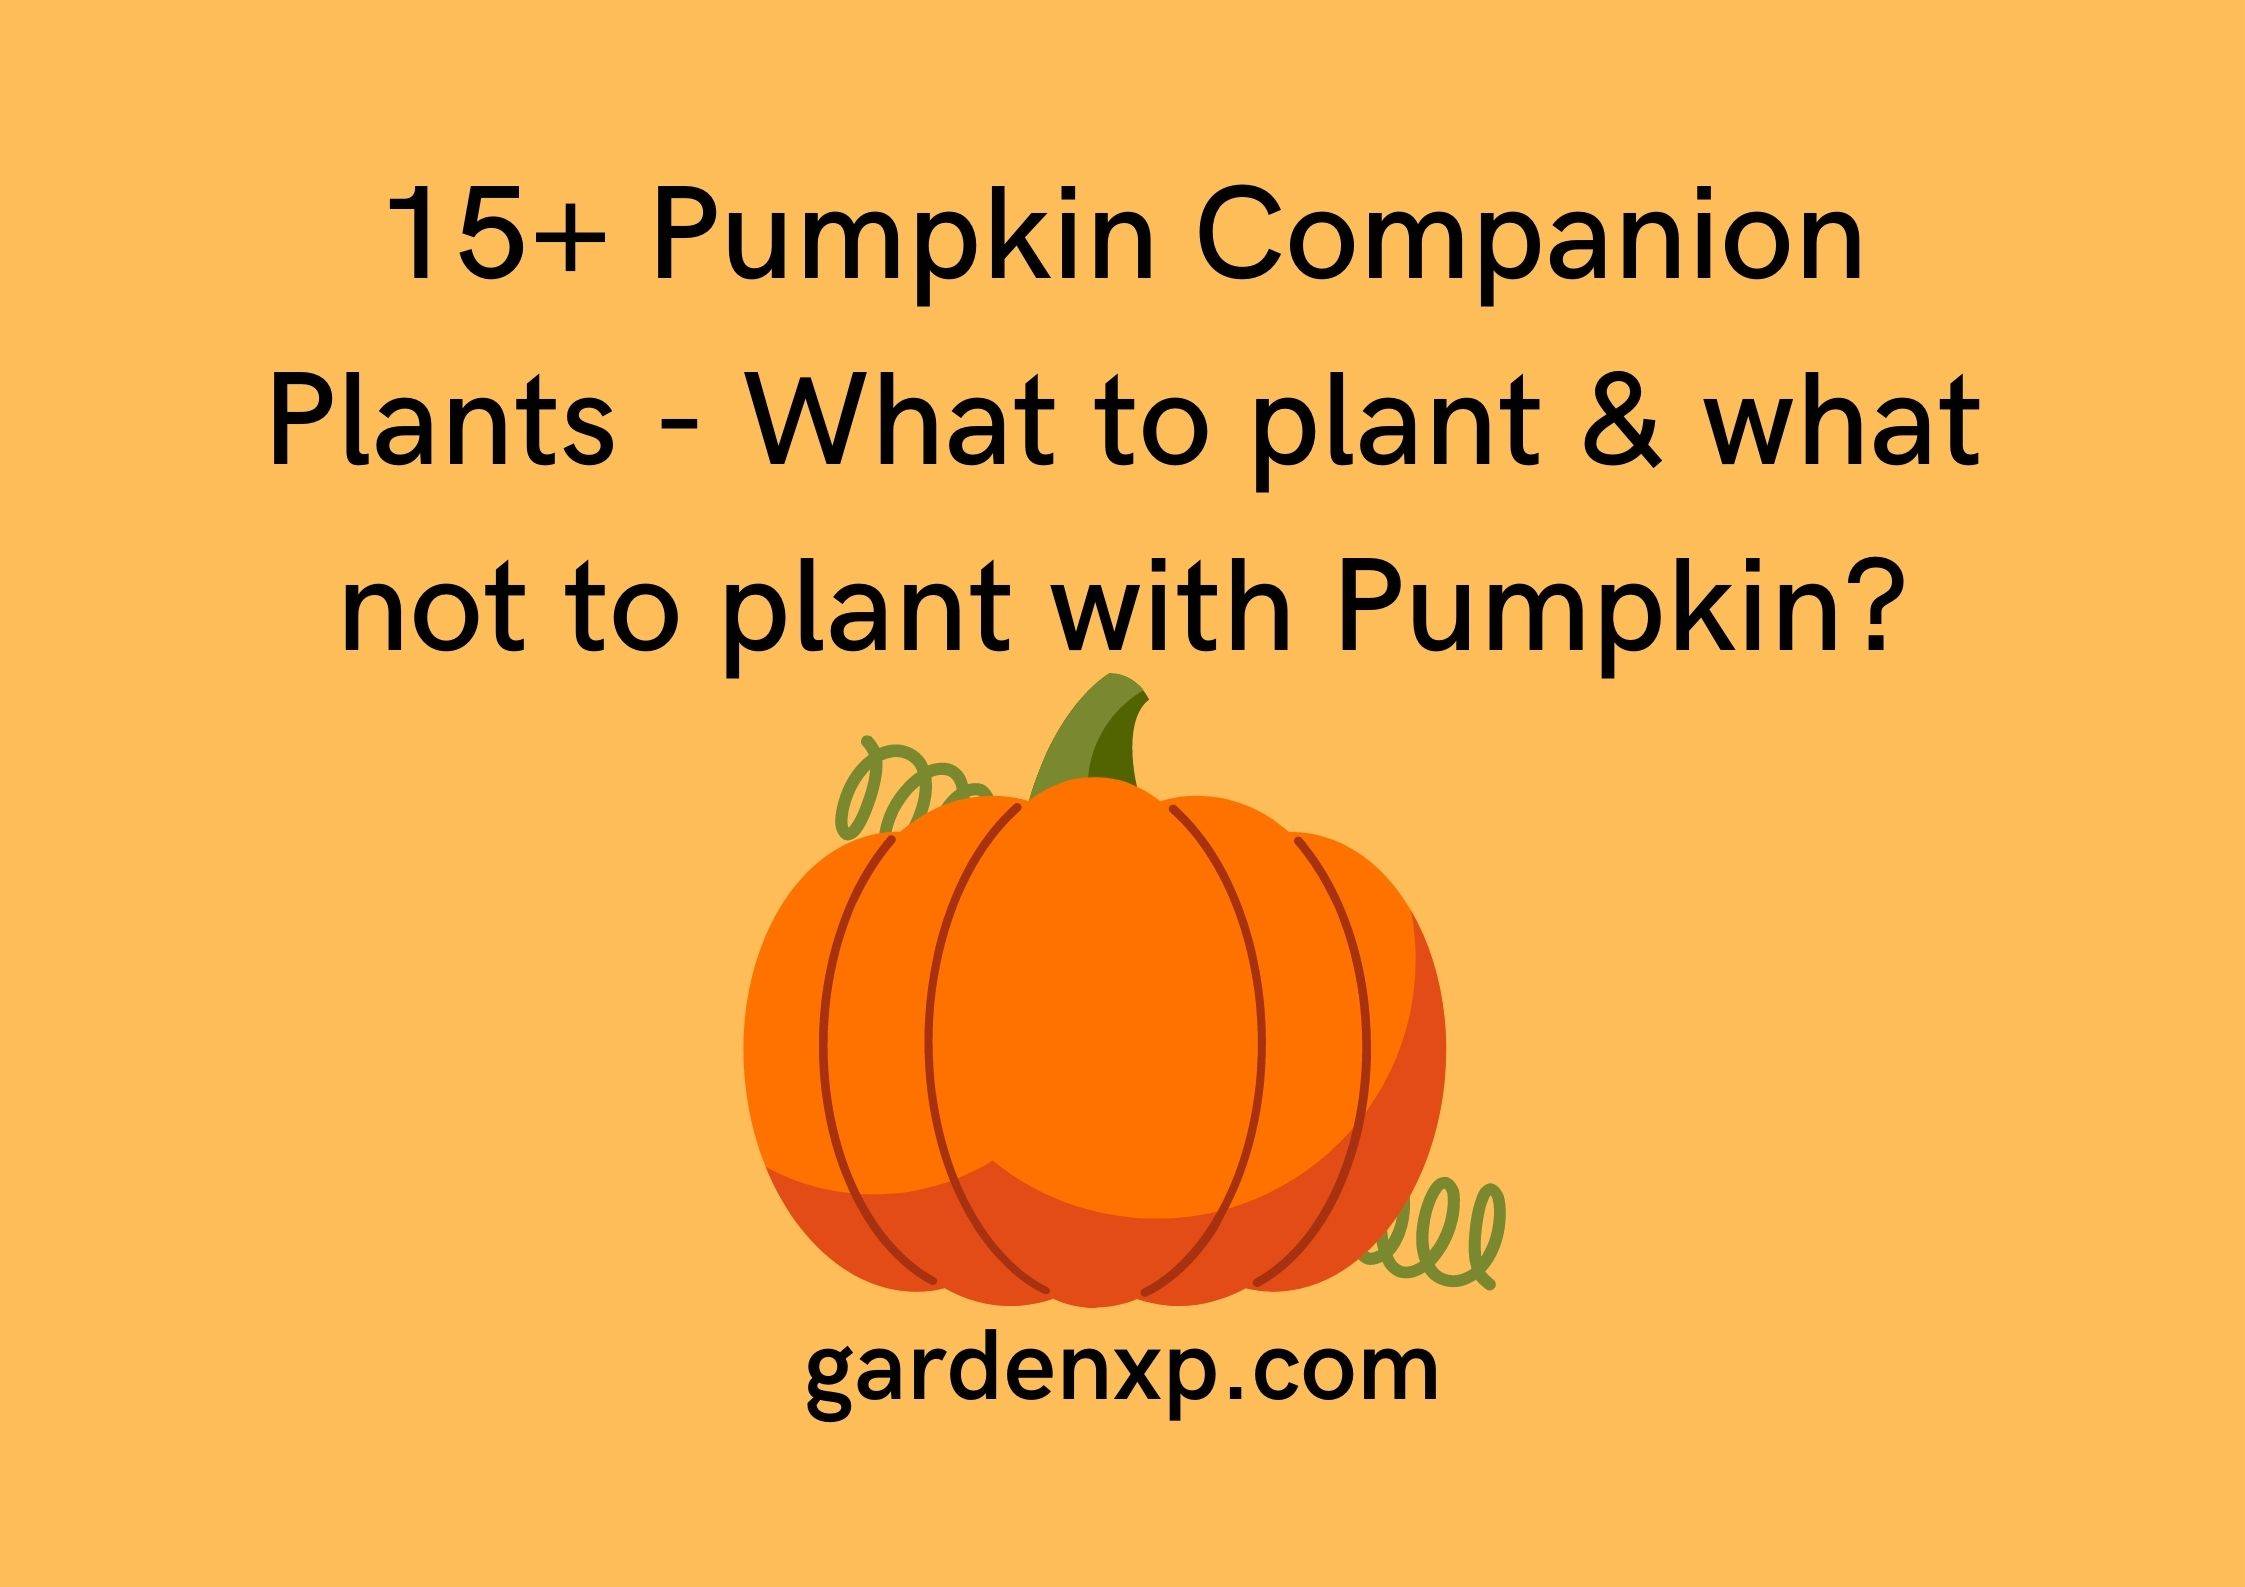 15+ Pumpkin Companion Plants - What to plant & what not to plant with Pumpkin?